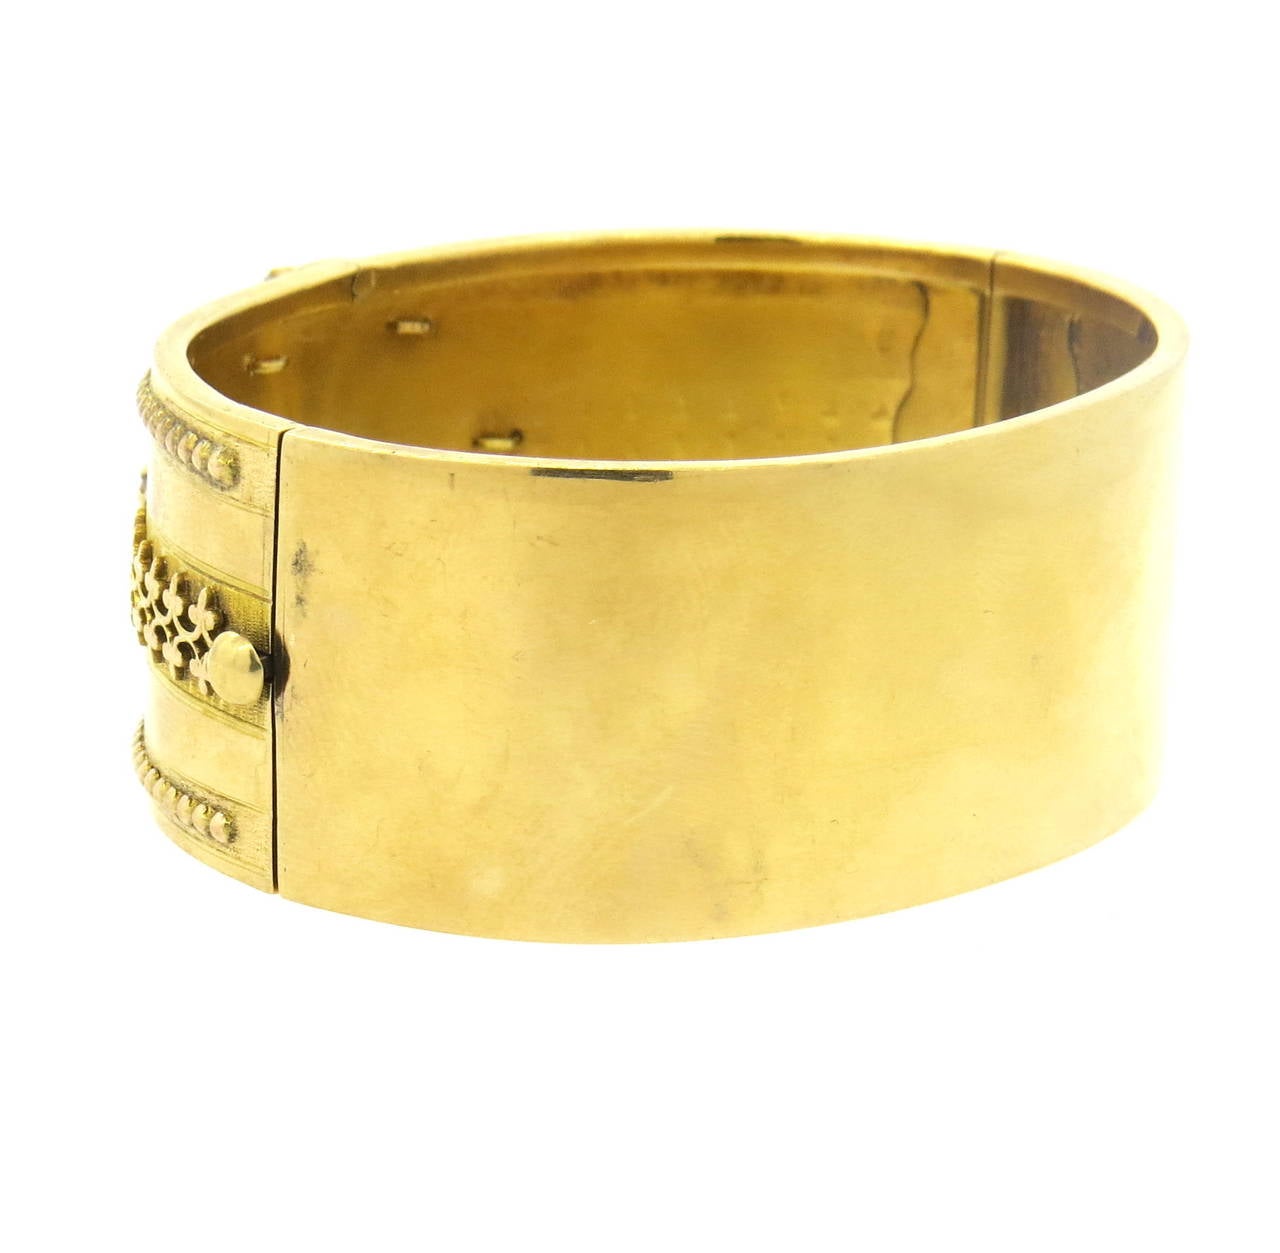 Victorian 14k gold bangle bracelet, adorned with rose cut diamonds and black enamel. Bangle will fit up to 7